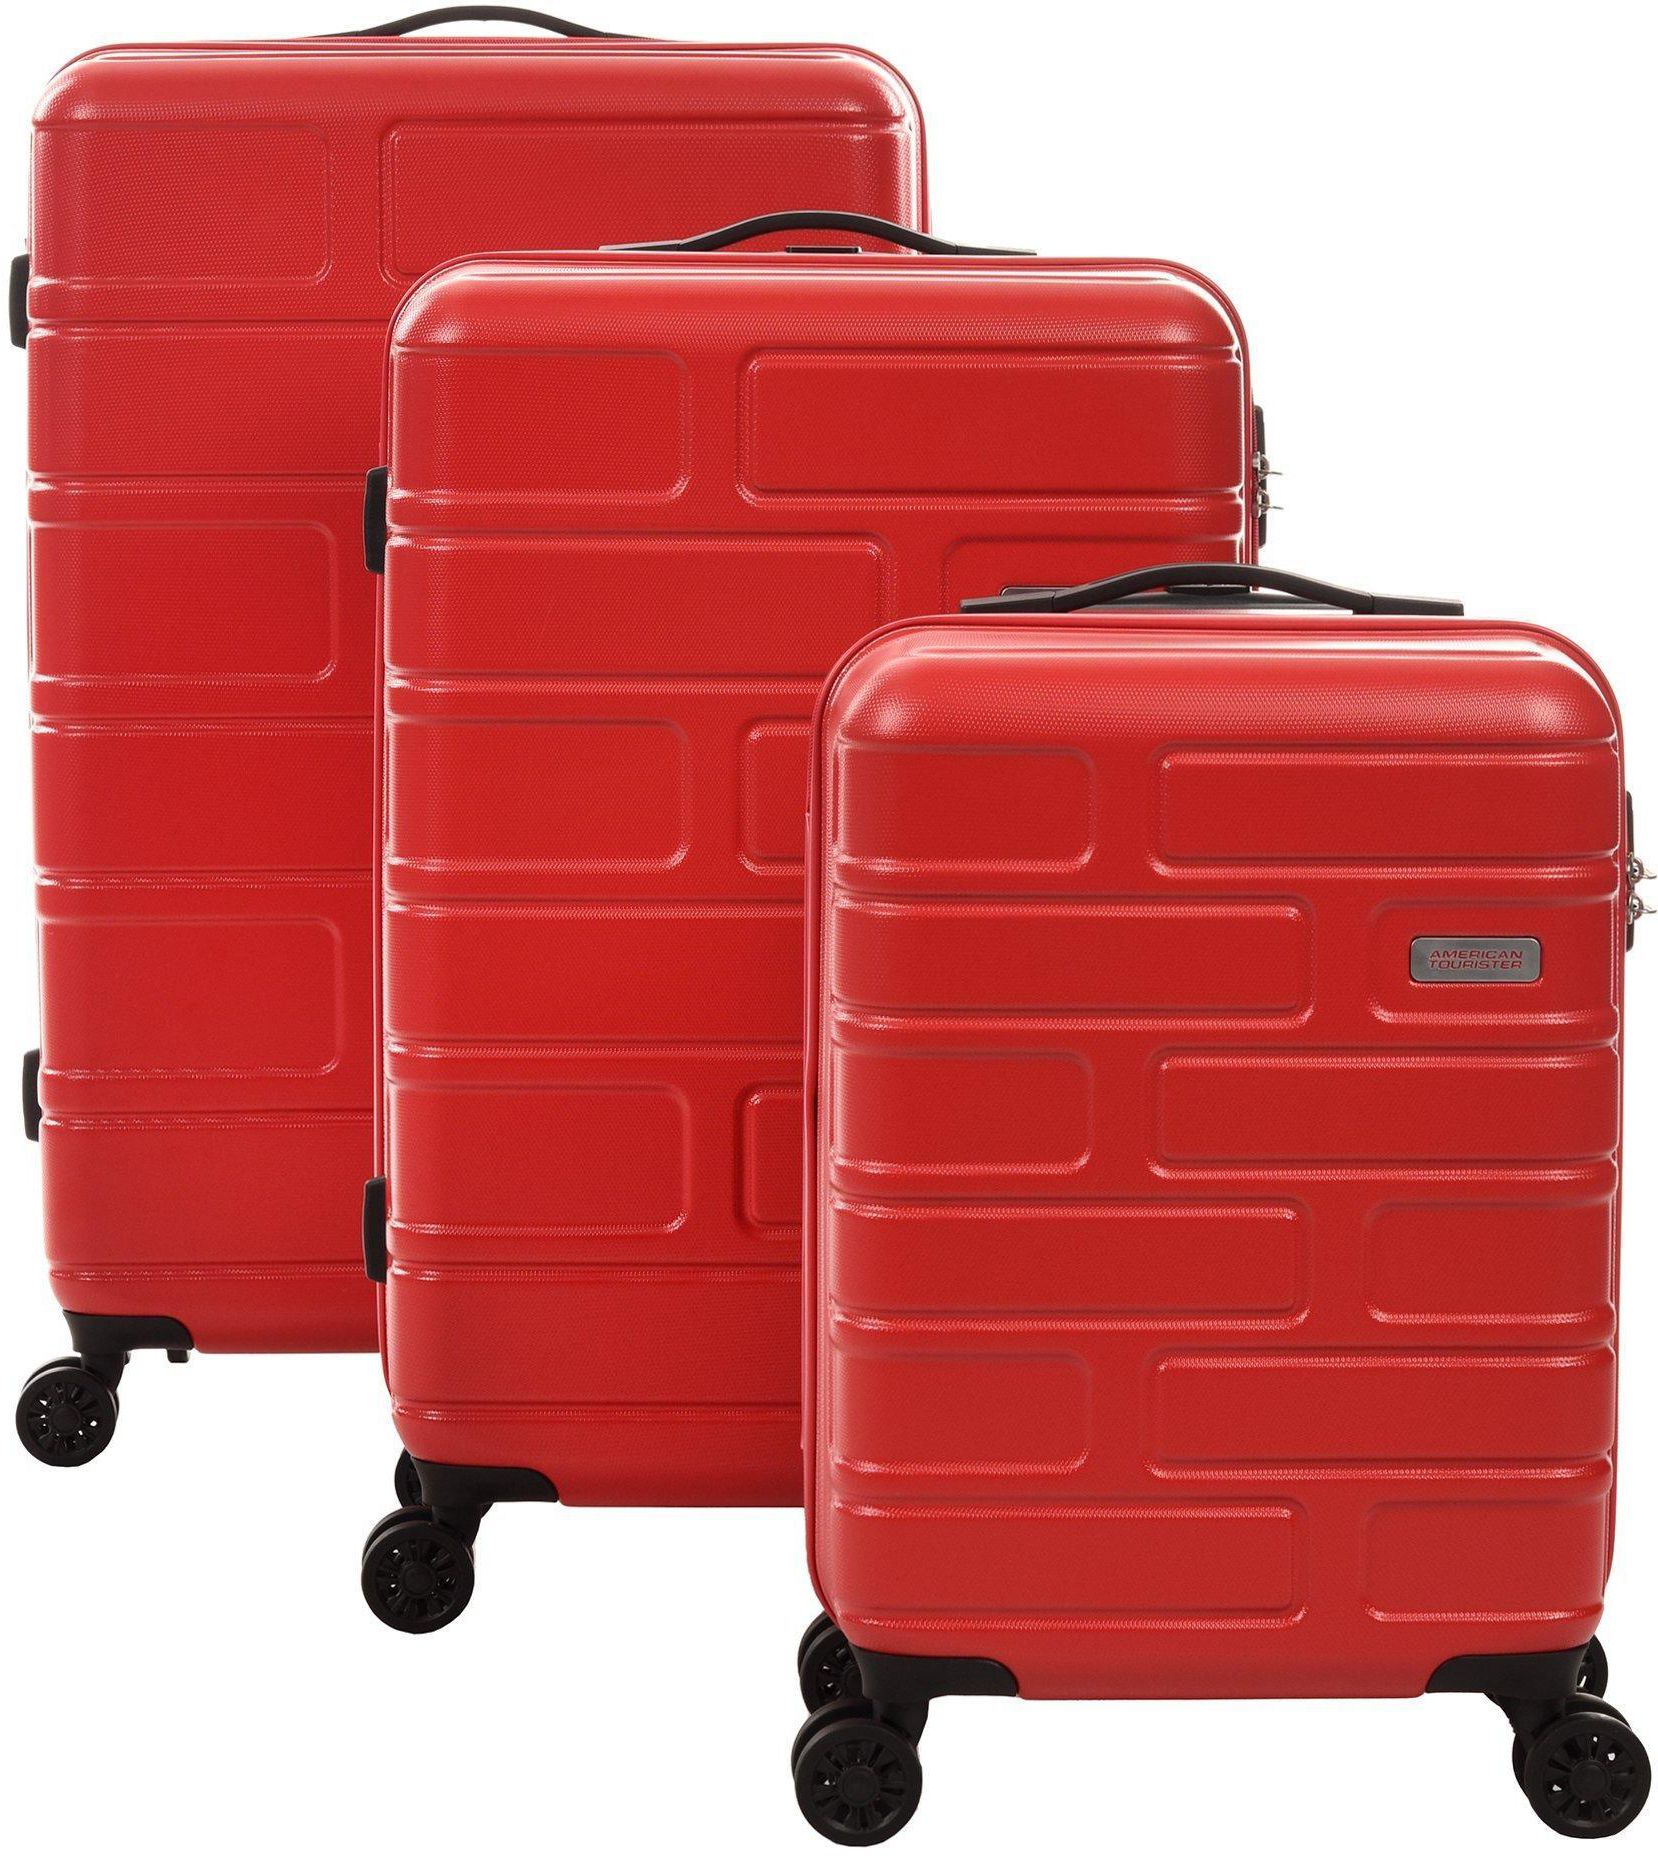 American Tourister Bricklane Set of 3Pc ABS Hard Luggage, 22/27/31 Inch, Red